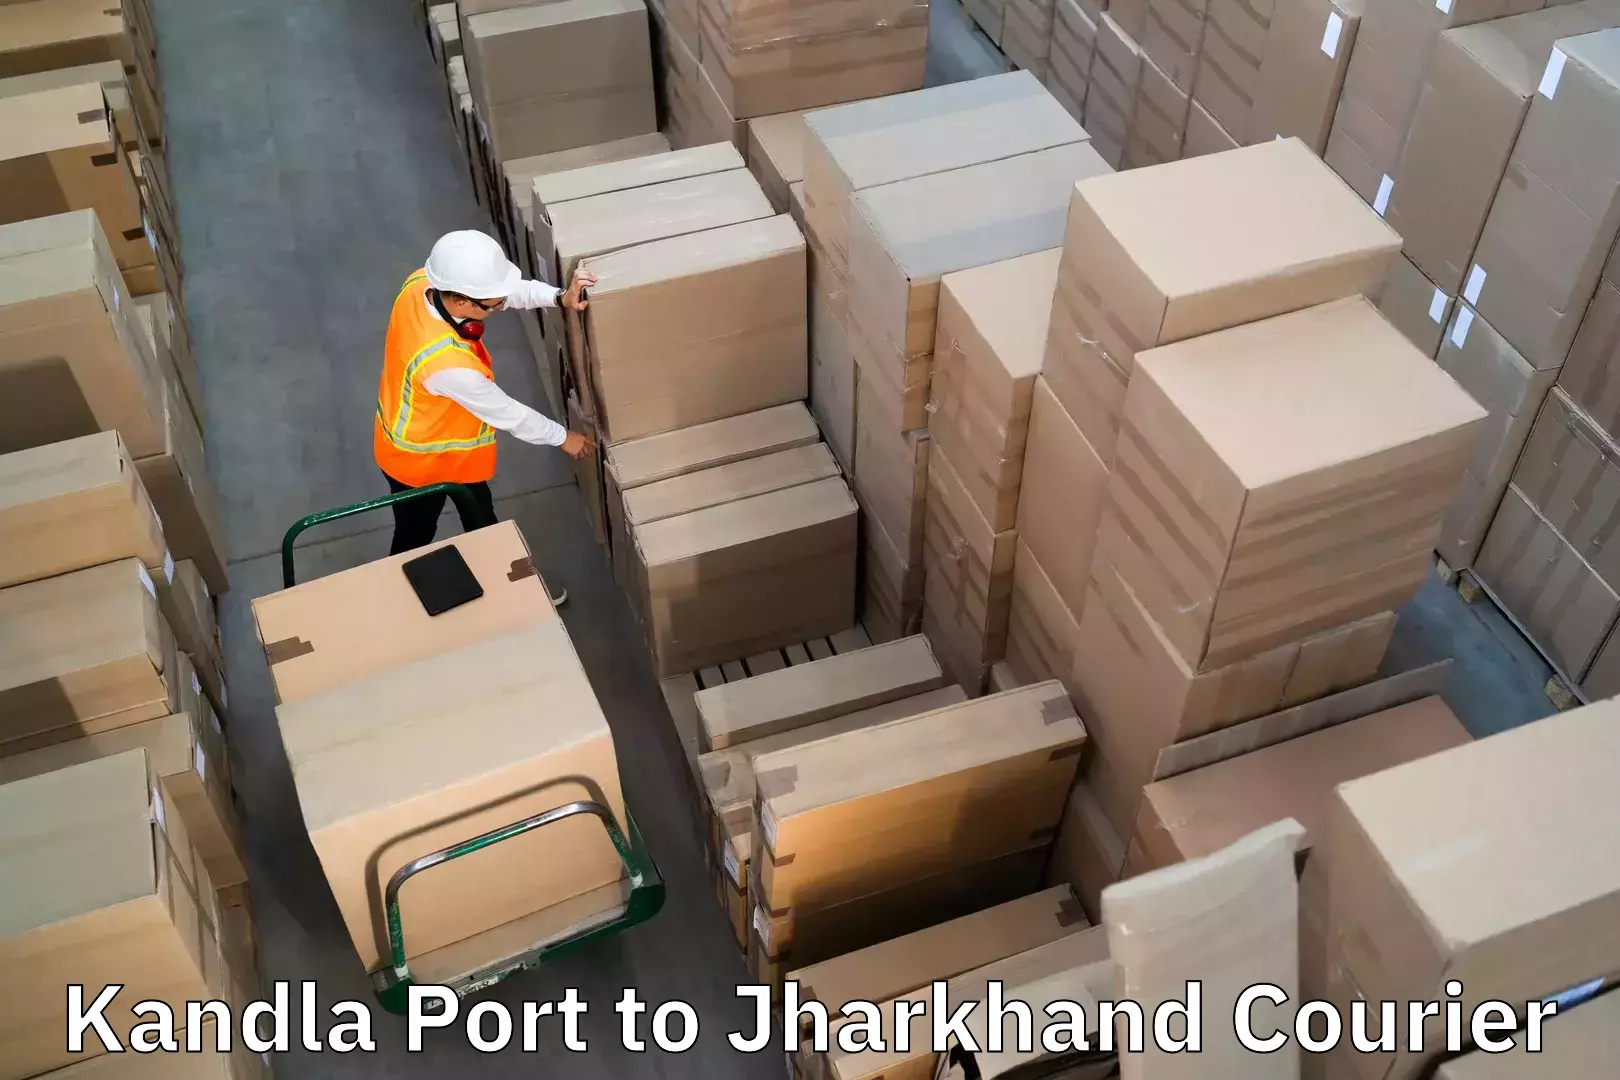 Reliable luggage courier Kandla Port to Bara Boarijor